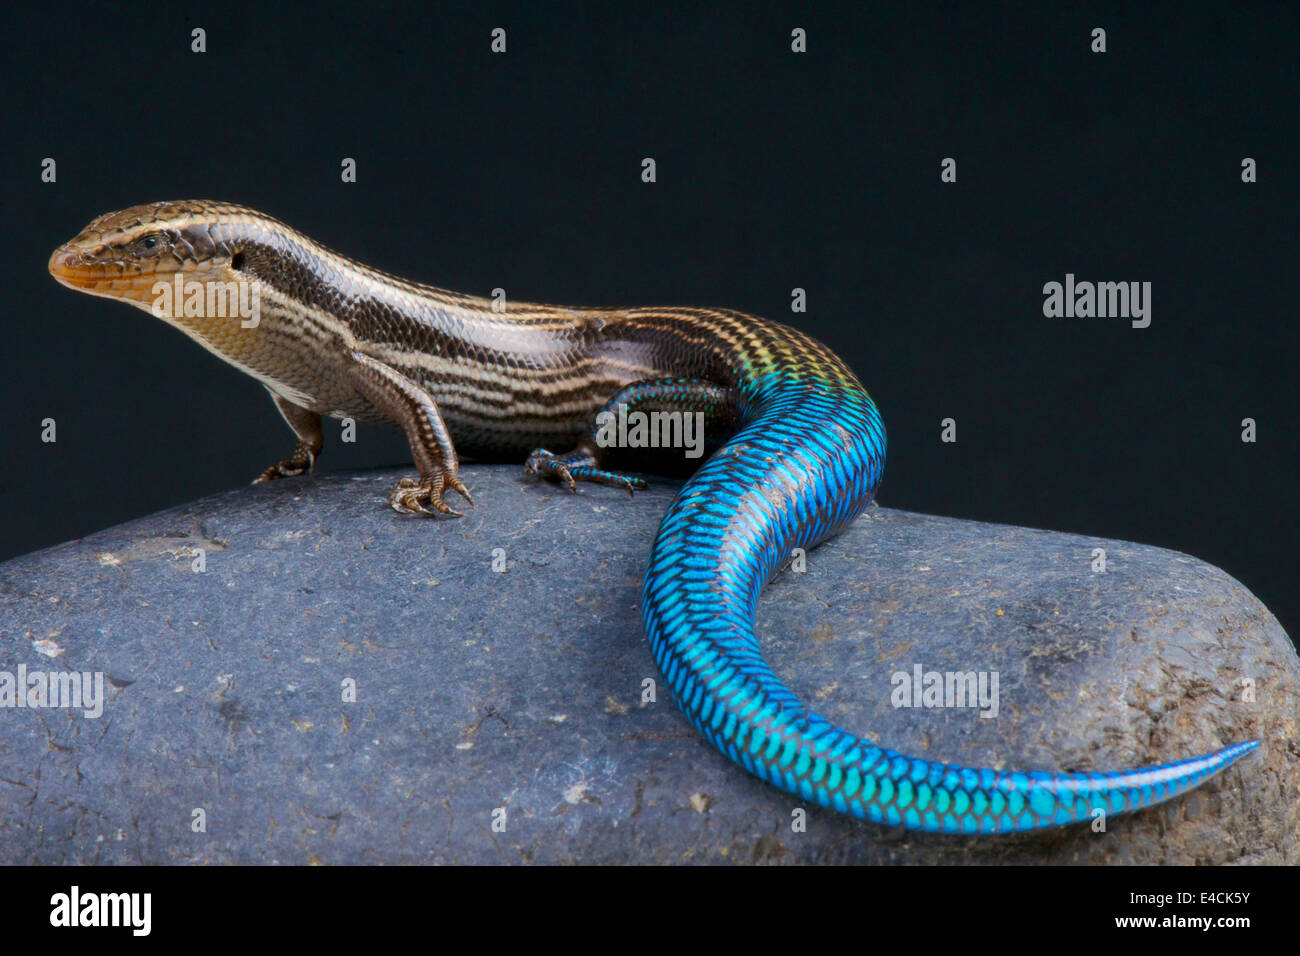 Gran Canaria blu-tailed skink / Chalcides sexlineatus Foto Stock